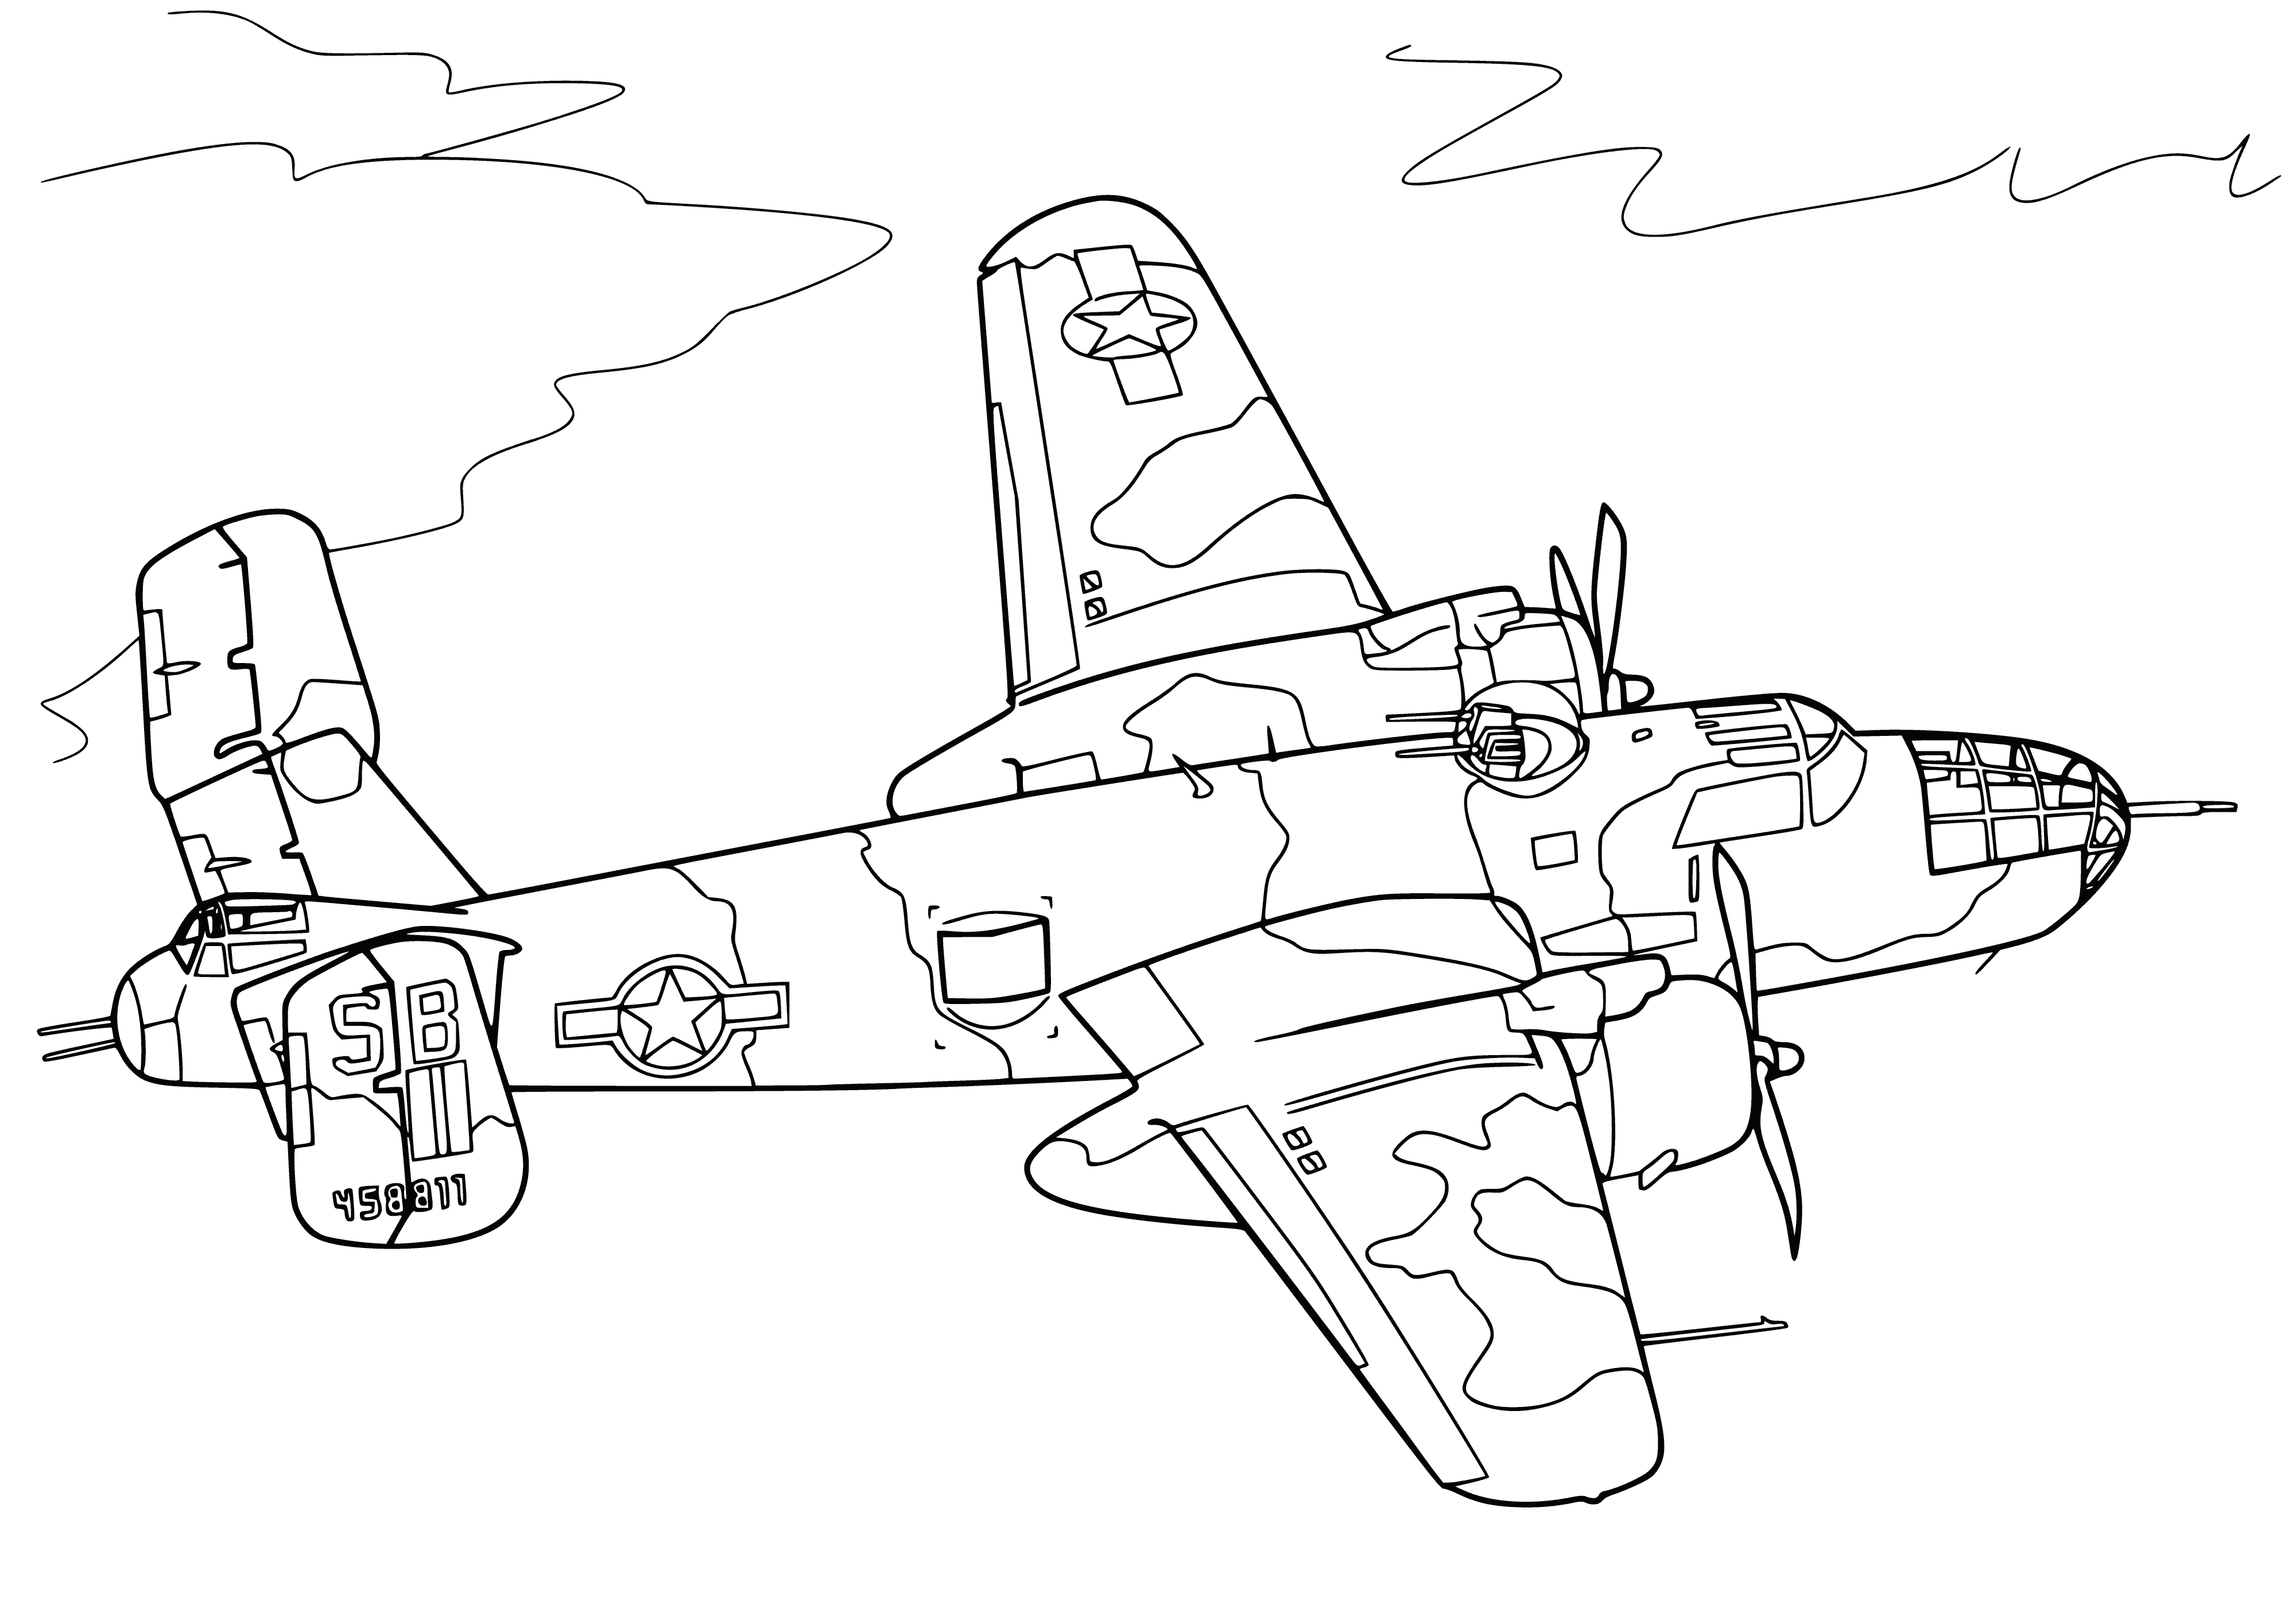 coloring page: Military aircraft used to cause destruction during battle, armed with guns and missiles and flown by experienced pilots. #MilitaryAviation